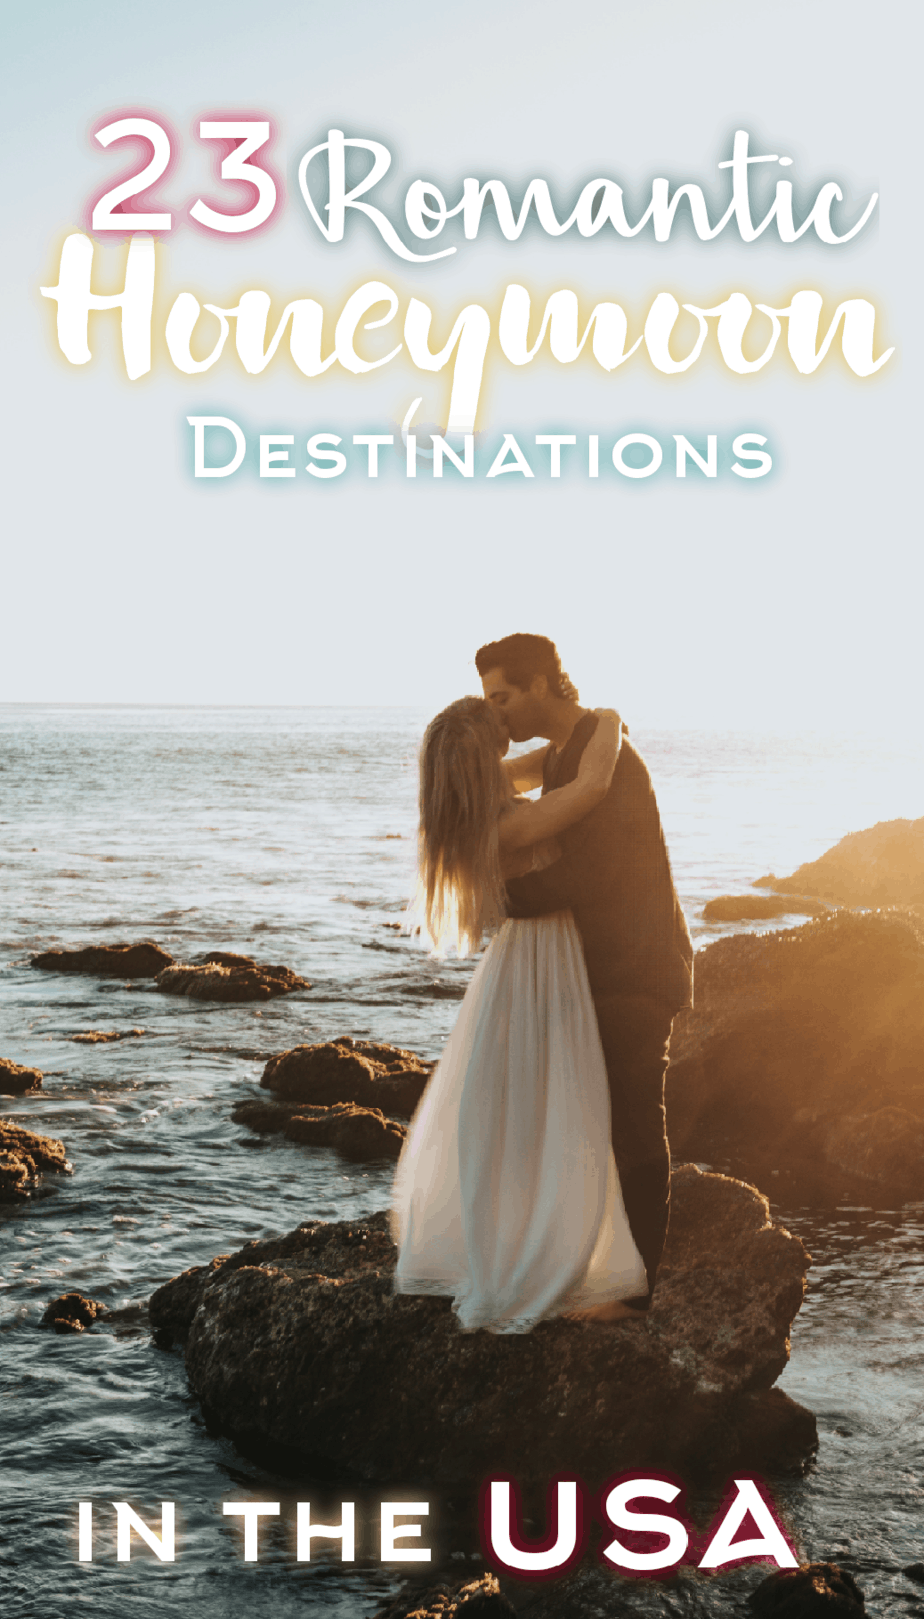 Pinterest social image that says “23 romantic honeymoon destinations in the USA.”